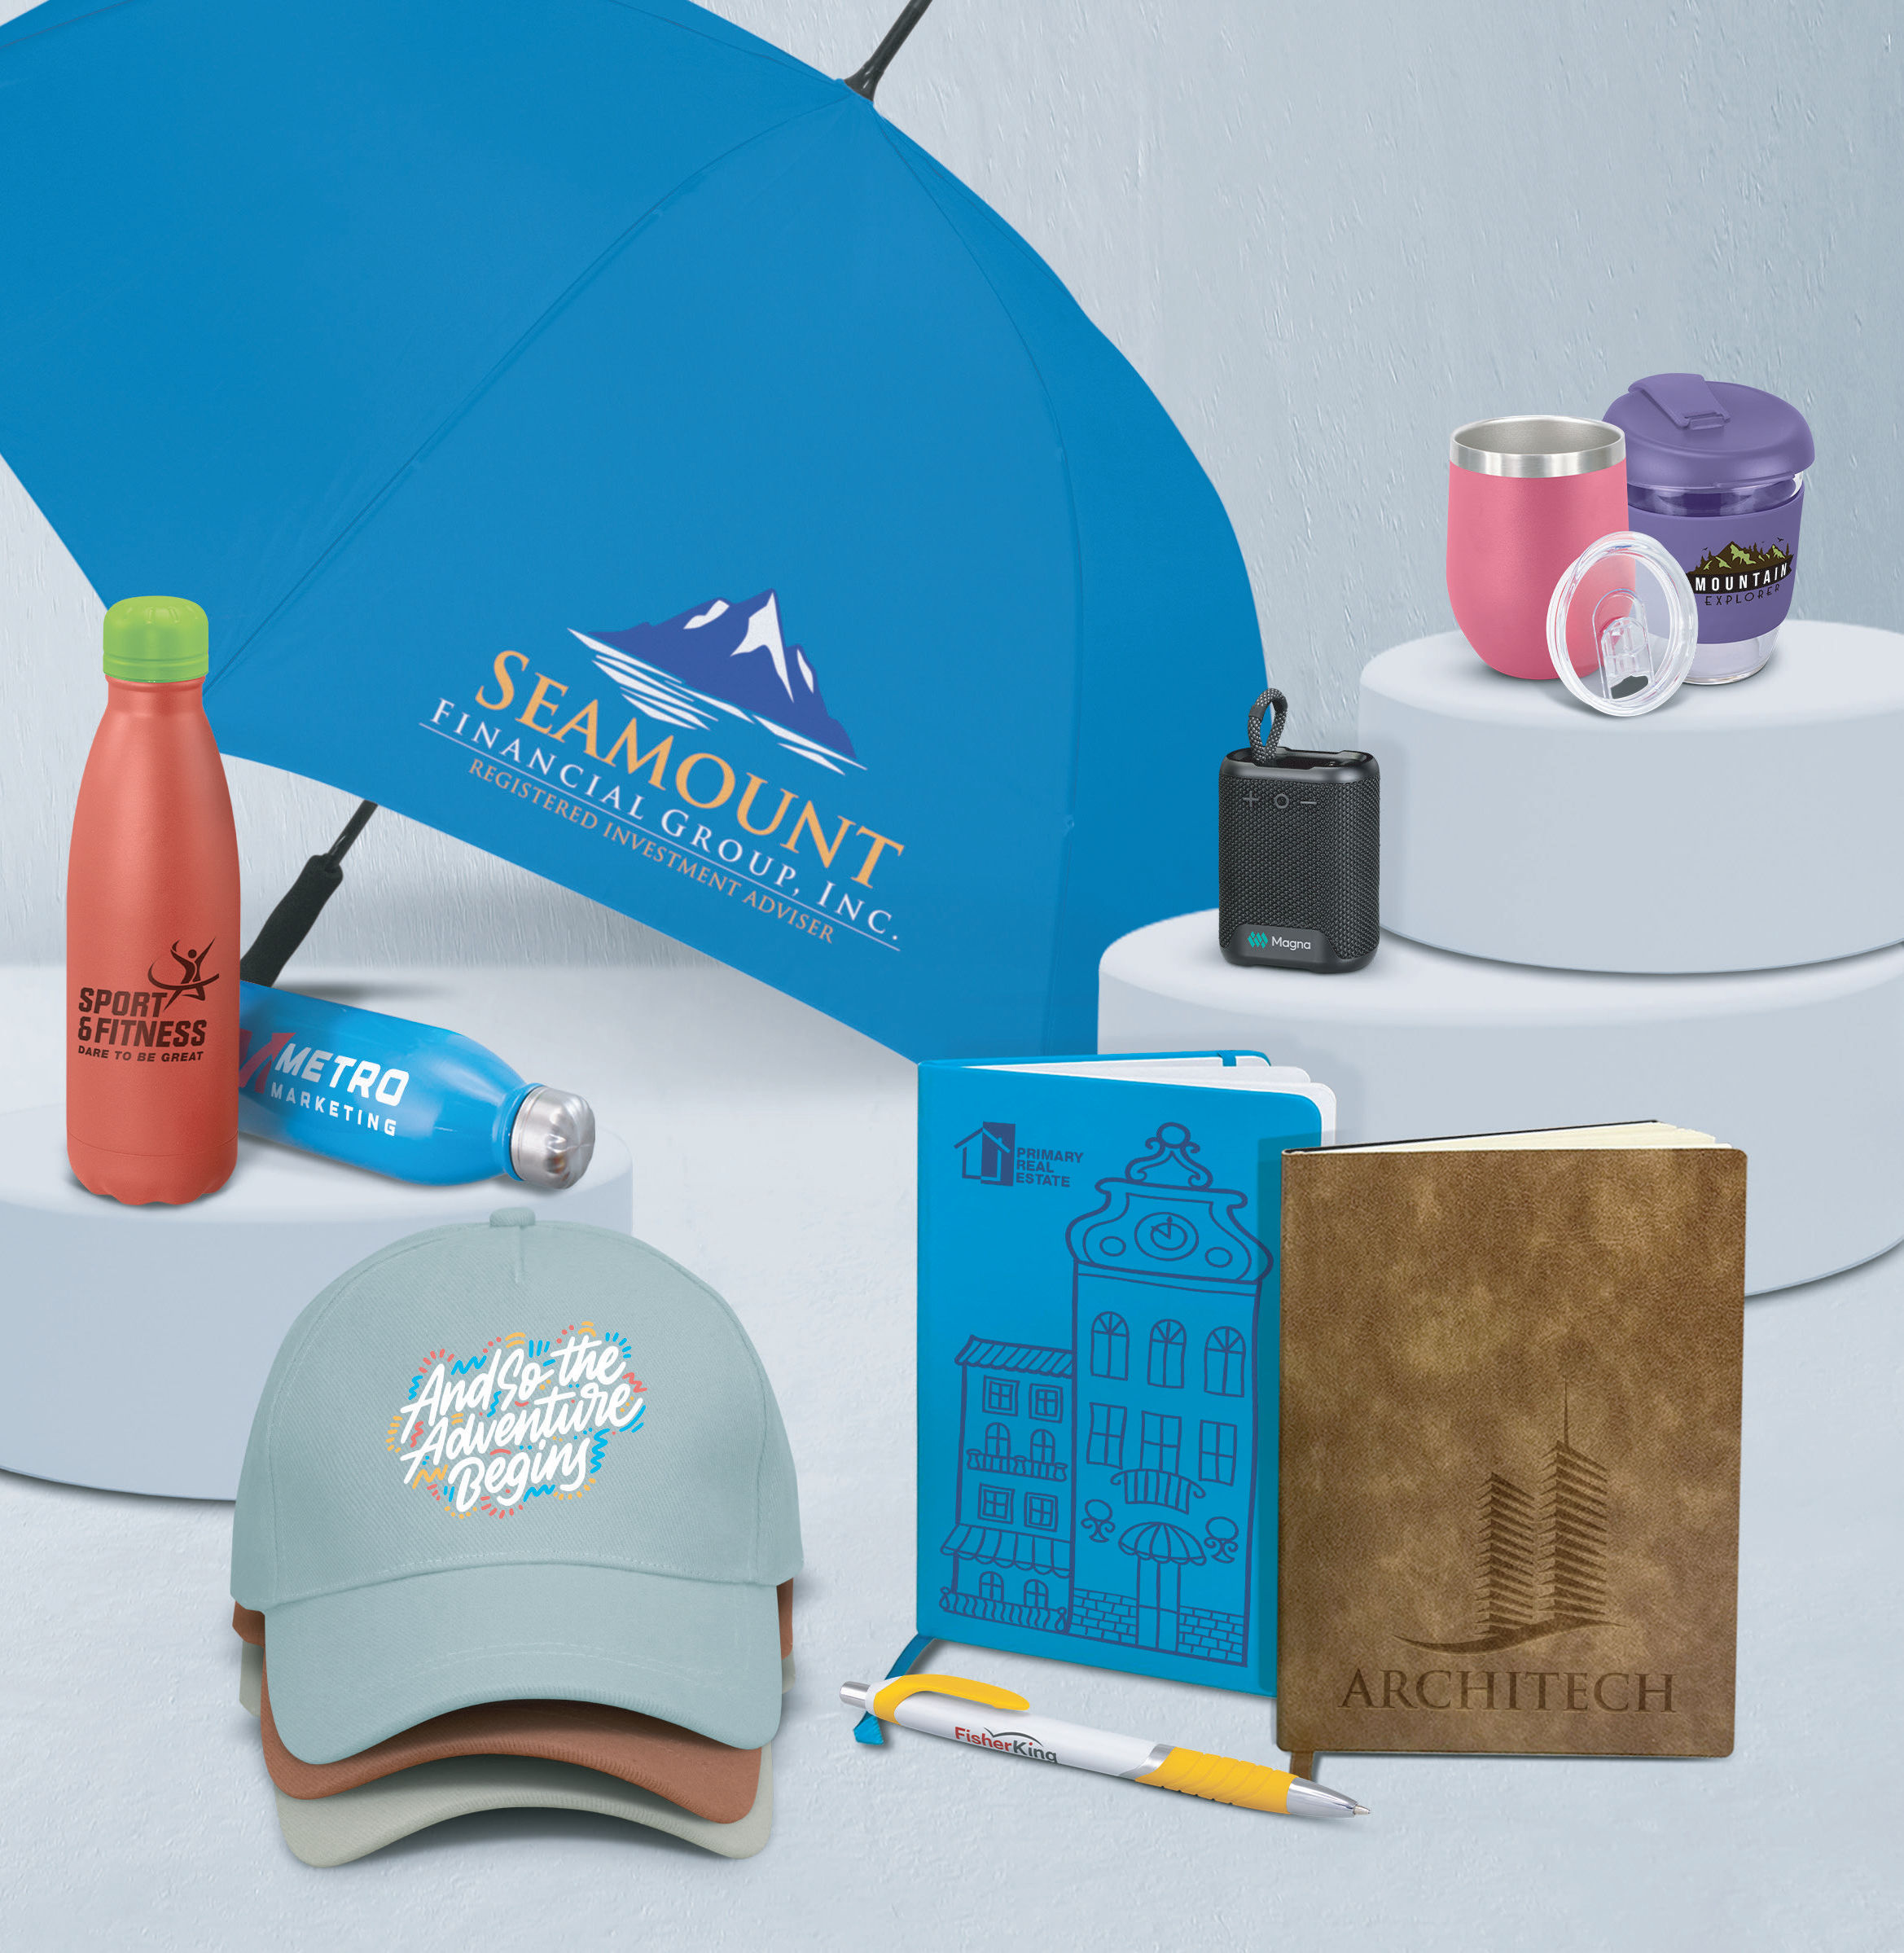 Our Top Picks For Promotional Products